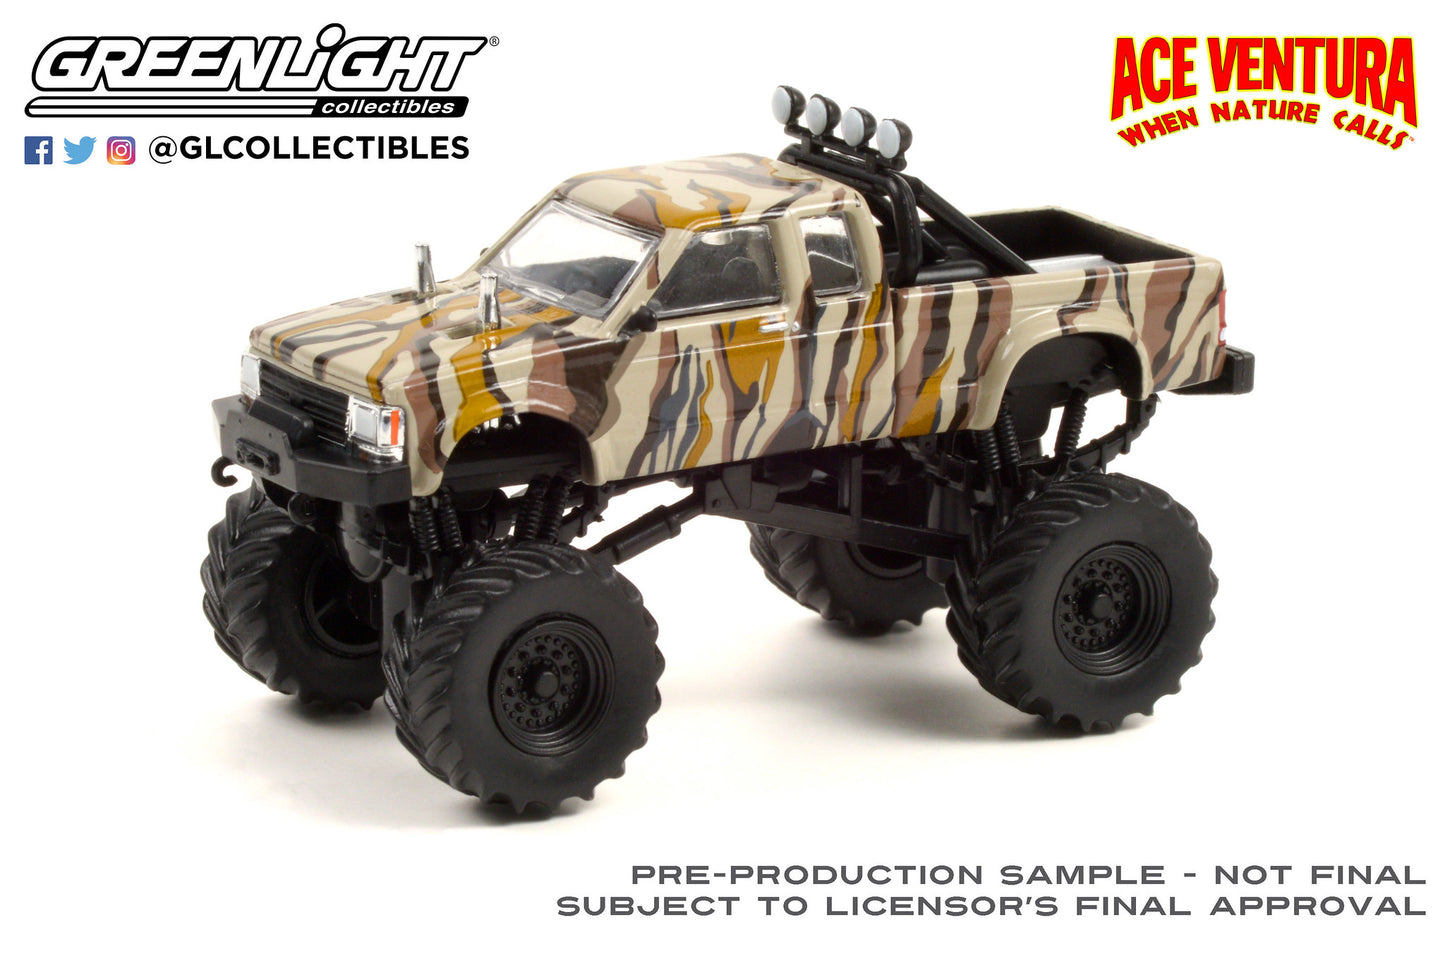 1:64 Hollywood Series 32 - Ace Ventura: When Nature Calls (1995) - 1989 Chevrolet S-10 Extended Cab Monster Truck